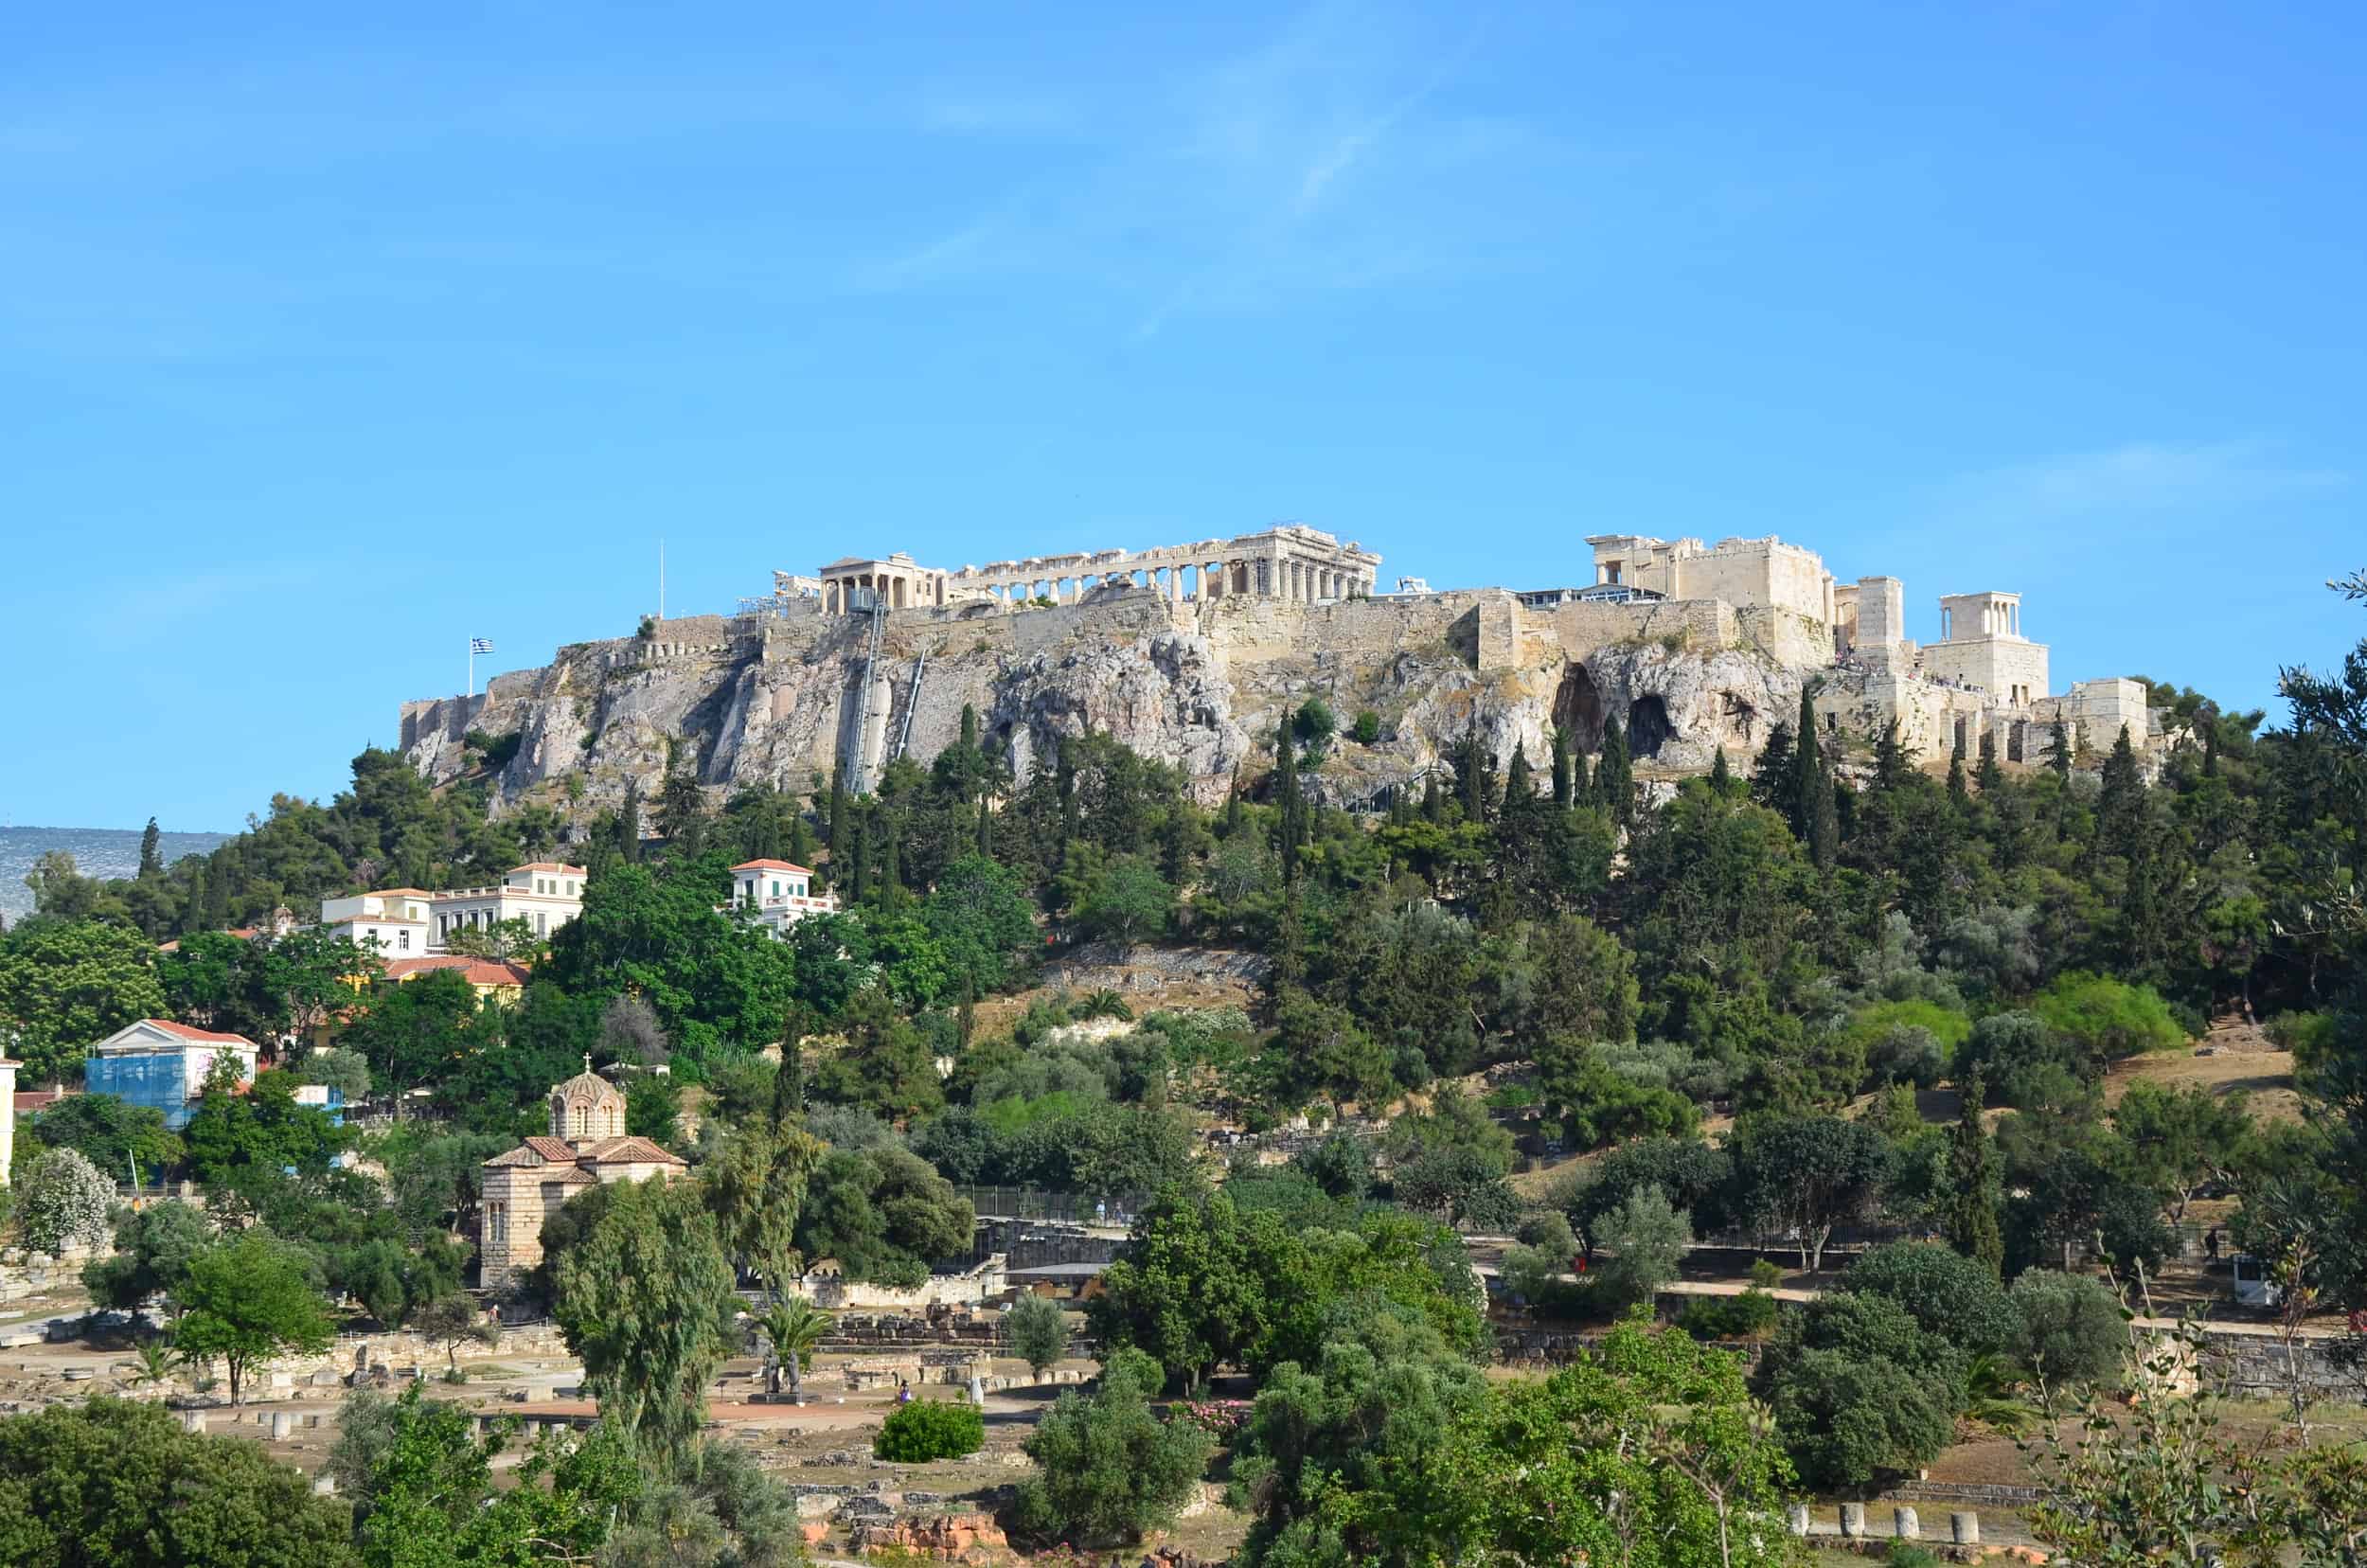 View of the Acropolis from the Agora